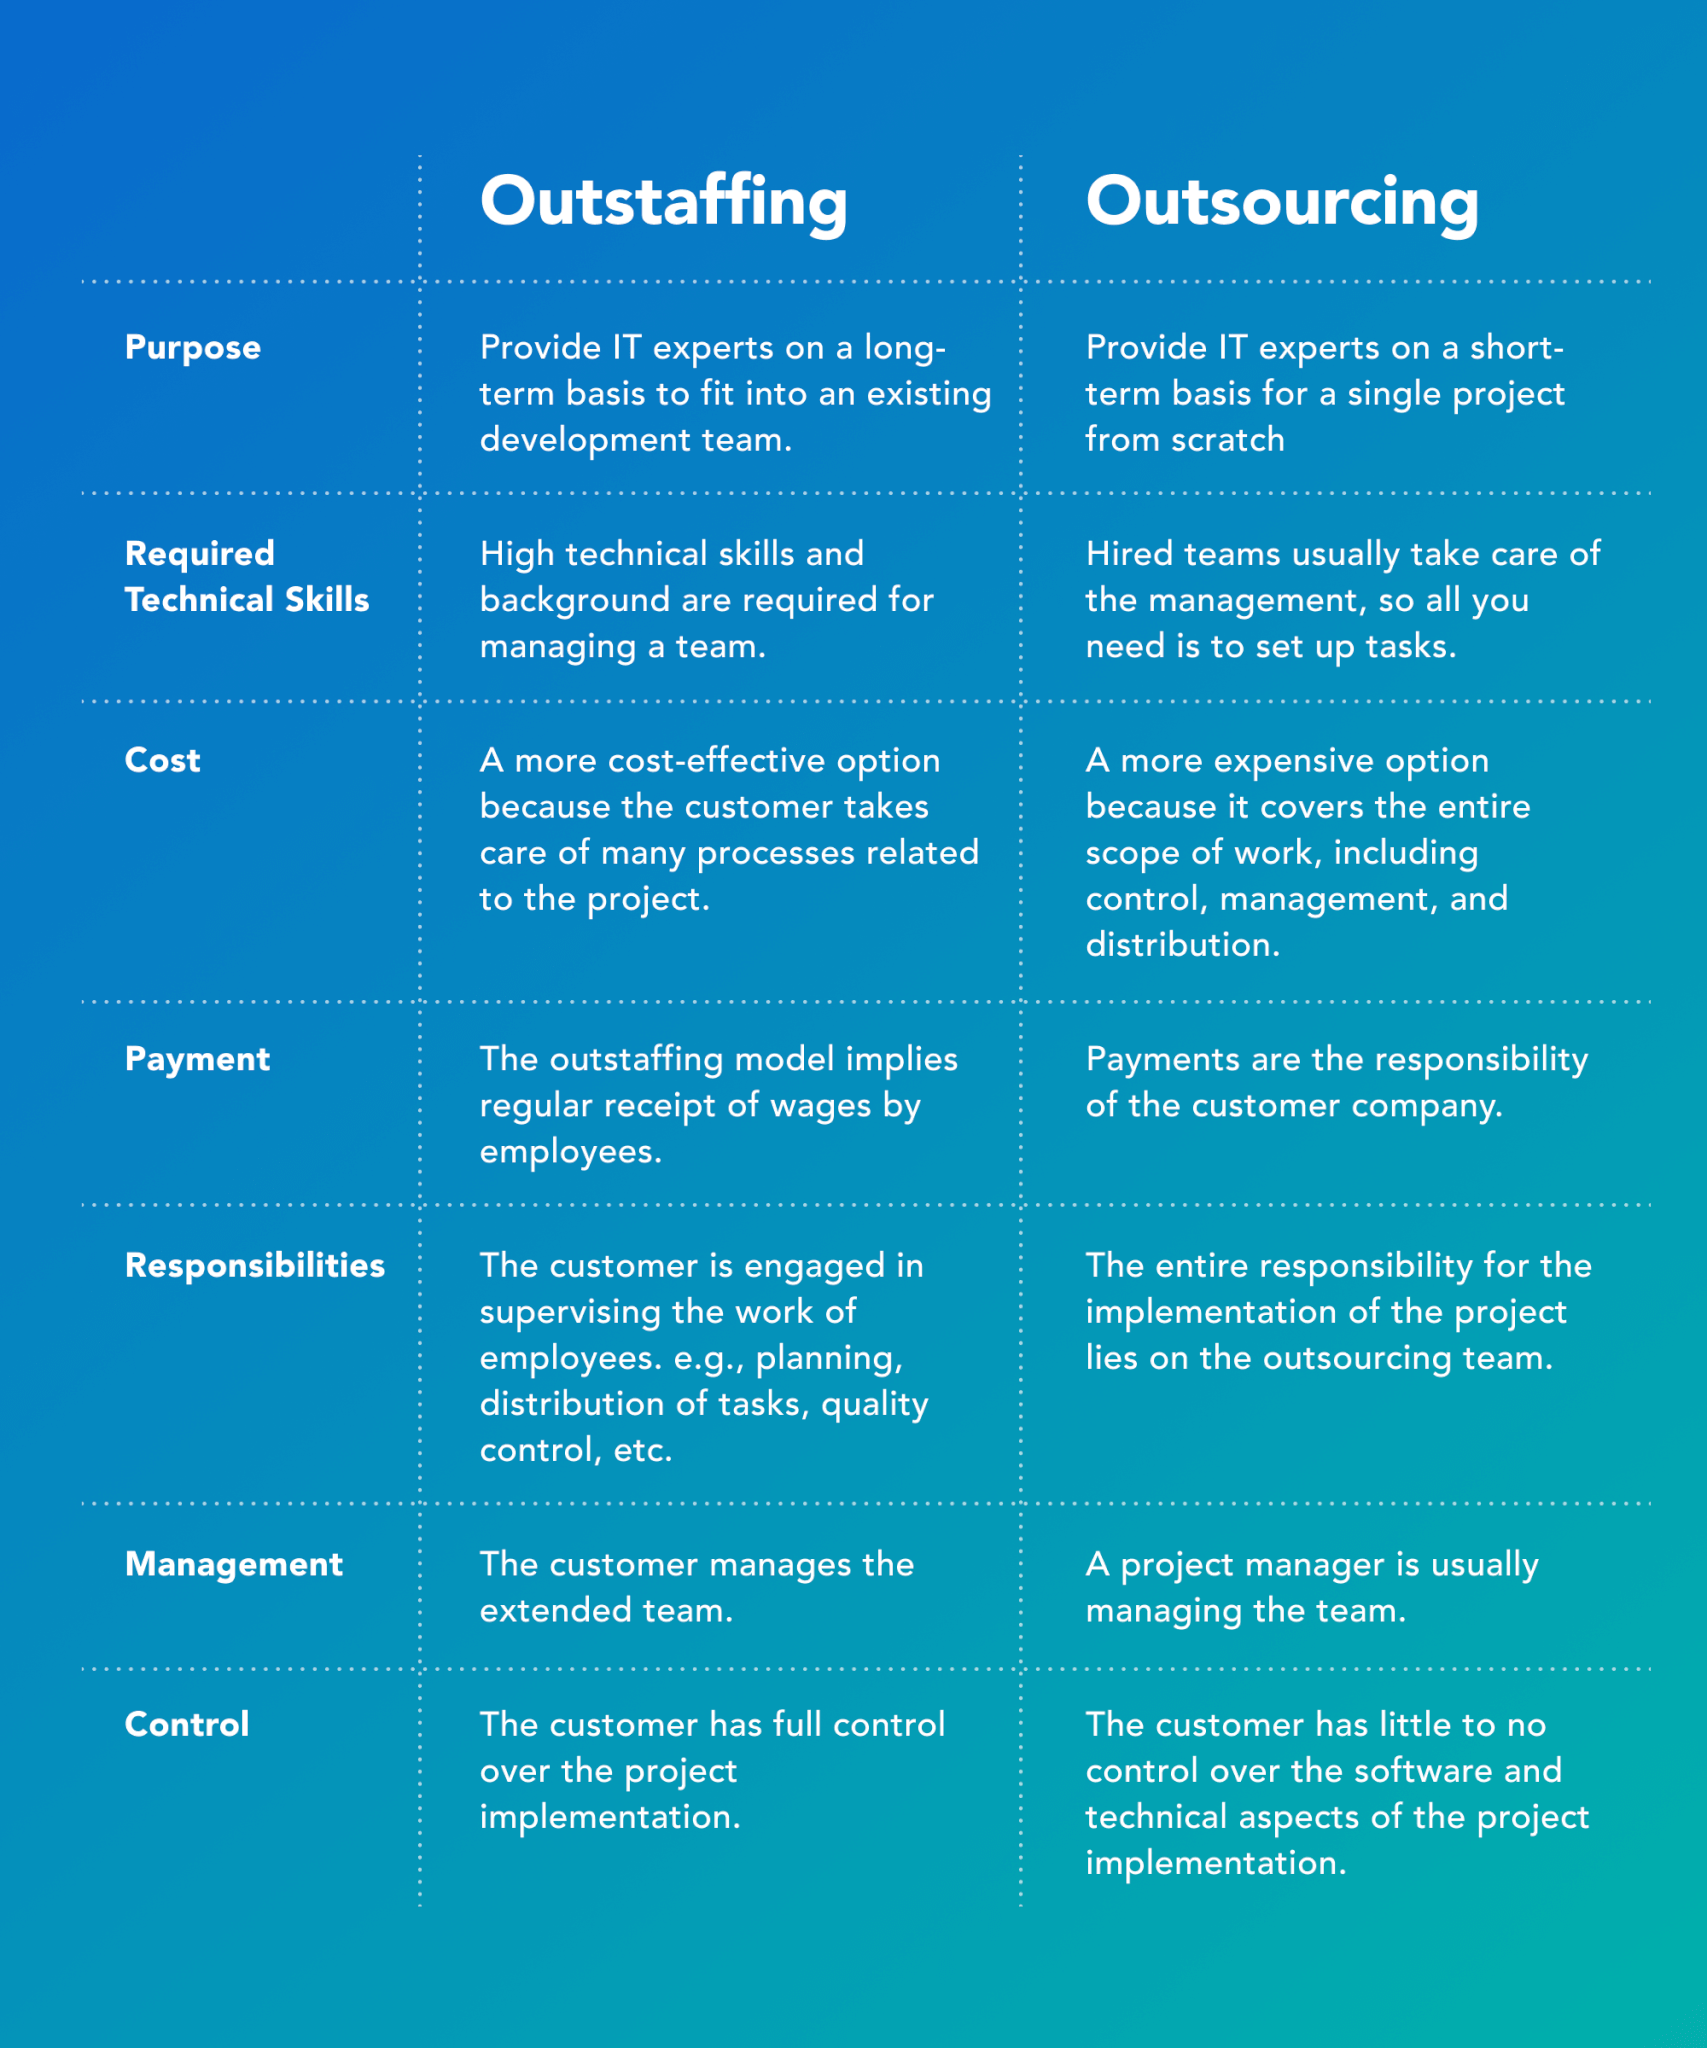 Key differences between outstaffing and outsourcing models.
